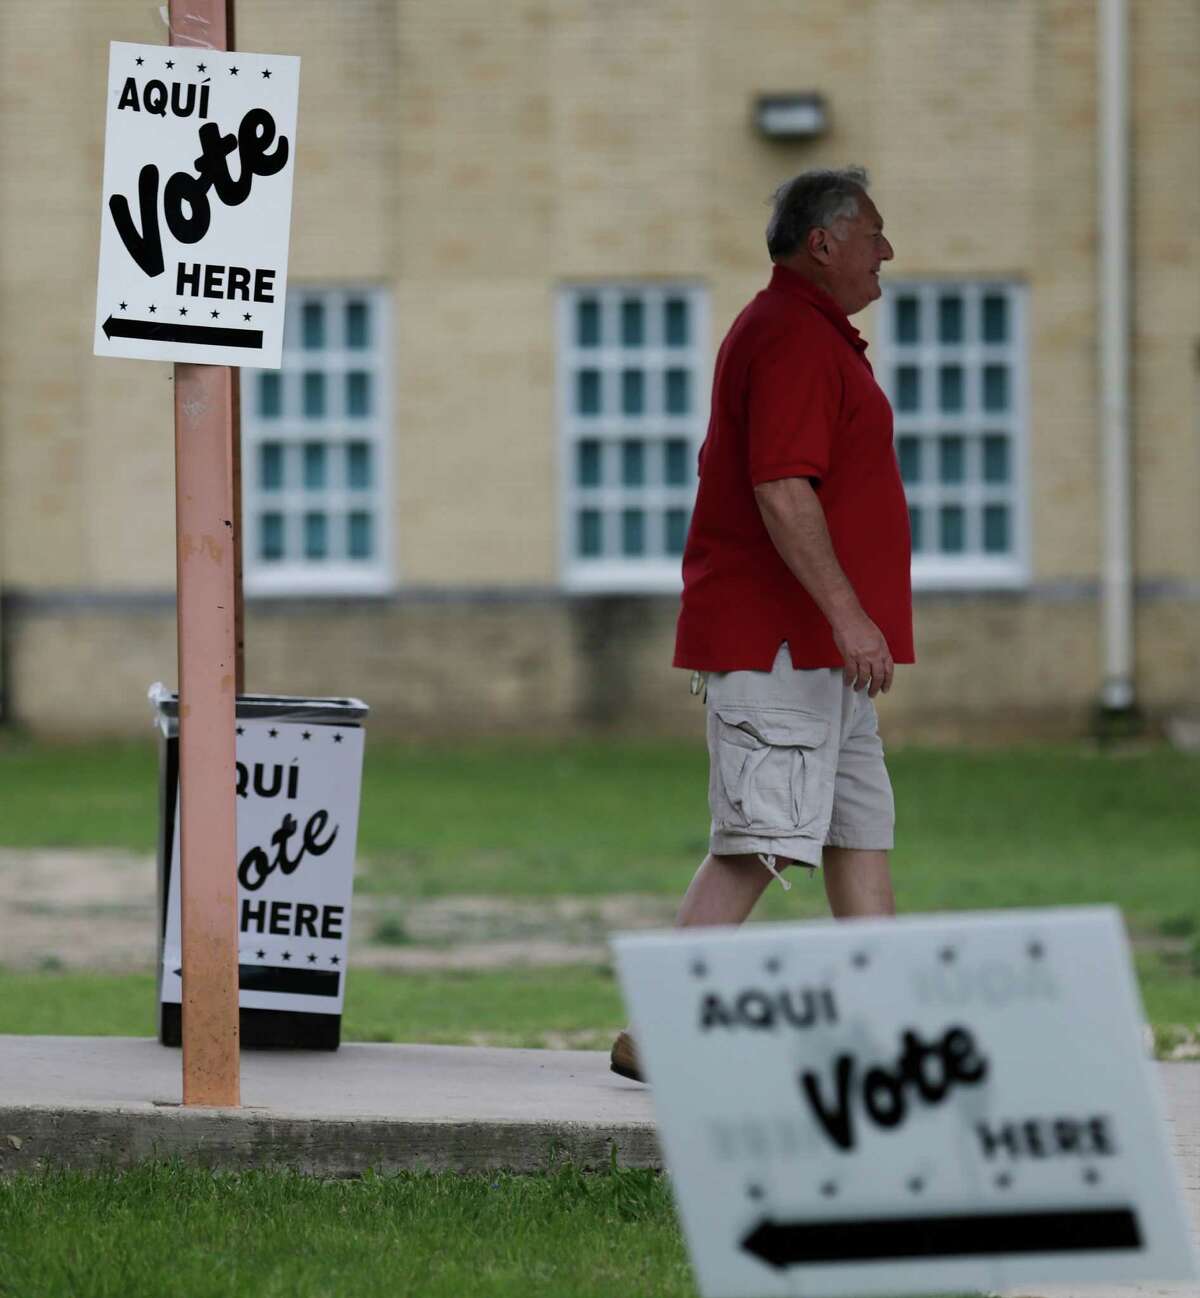 A voter leaves a polling site at Travis Early College High School on Saturday, May 9, 2015. (Kin Man Hui/San Antonio Express-News)